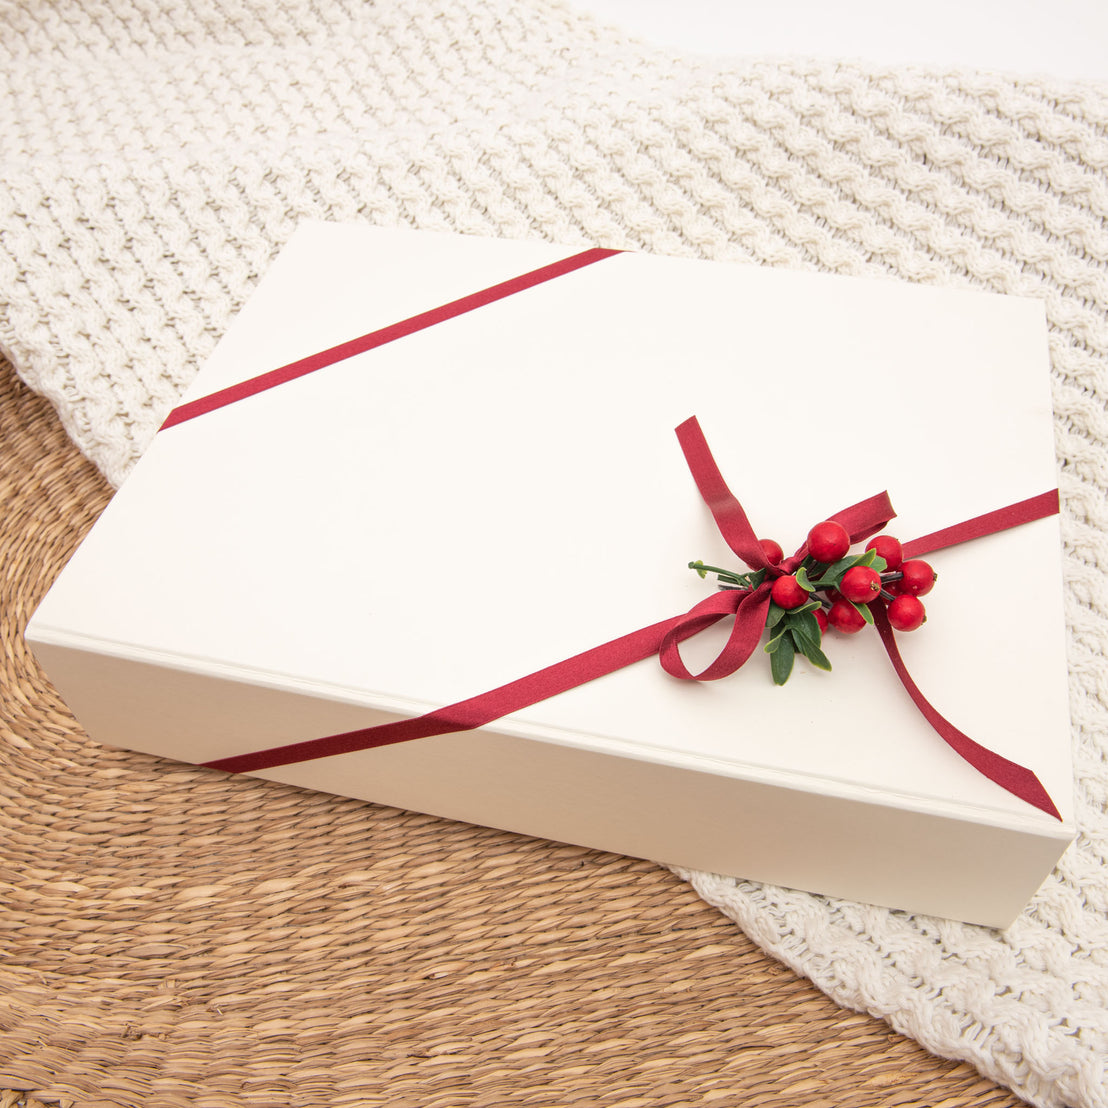 A rectangular ivory gift box with a magnetic closure, tied with a red ribbon and decorated with a small cluster of red berries and green leaves, resting on a knitted cream blanket with a woven background.